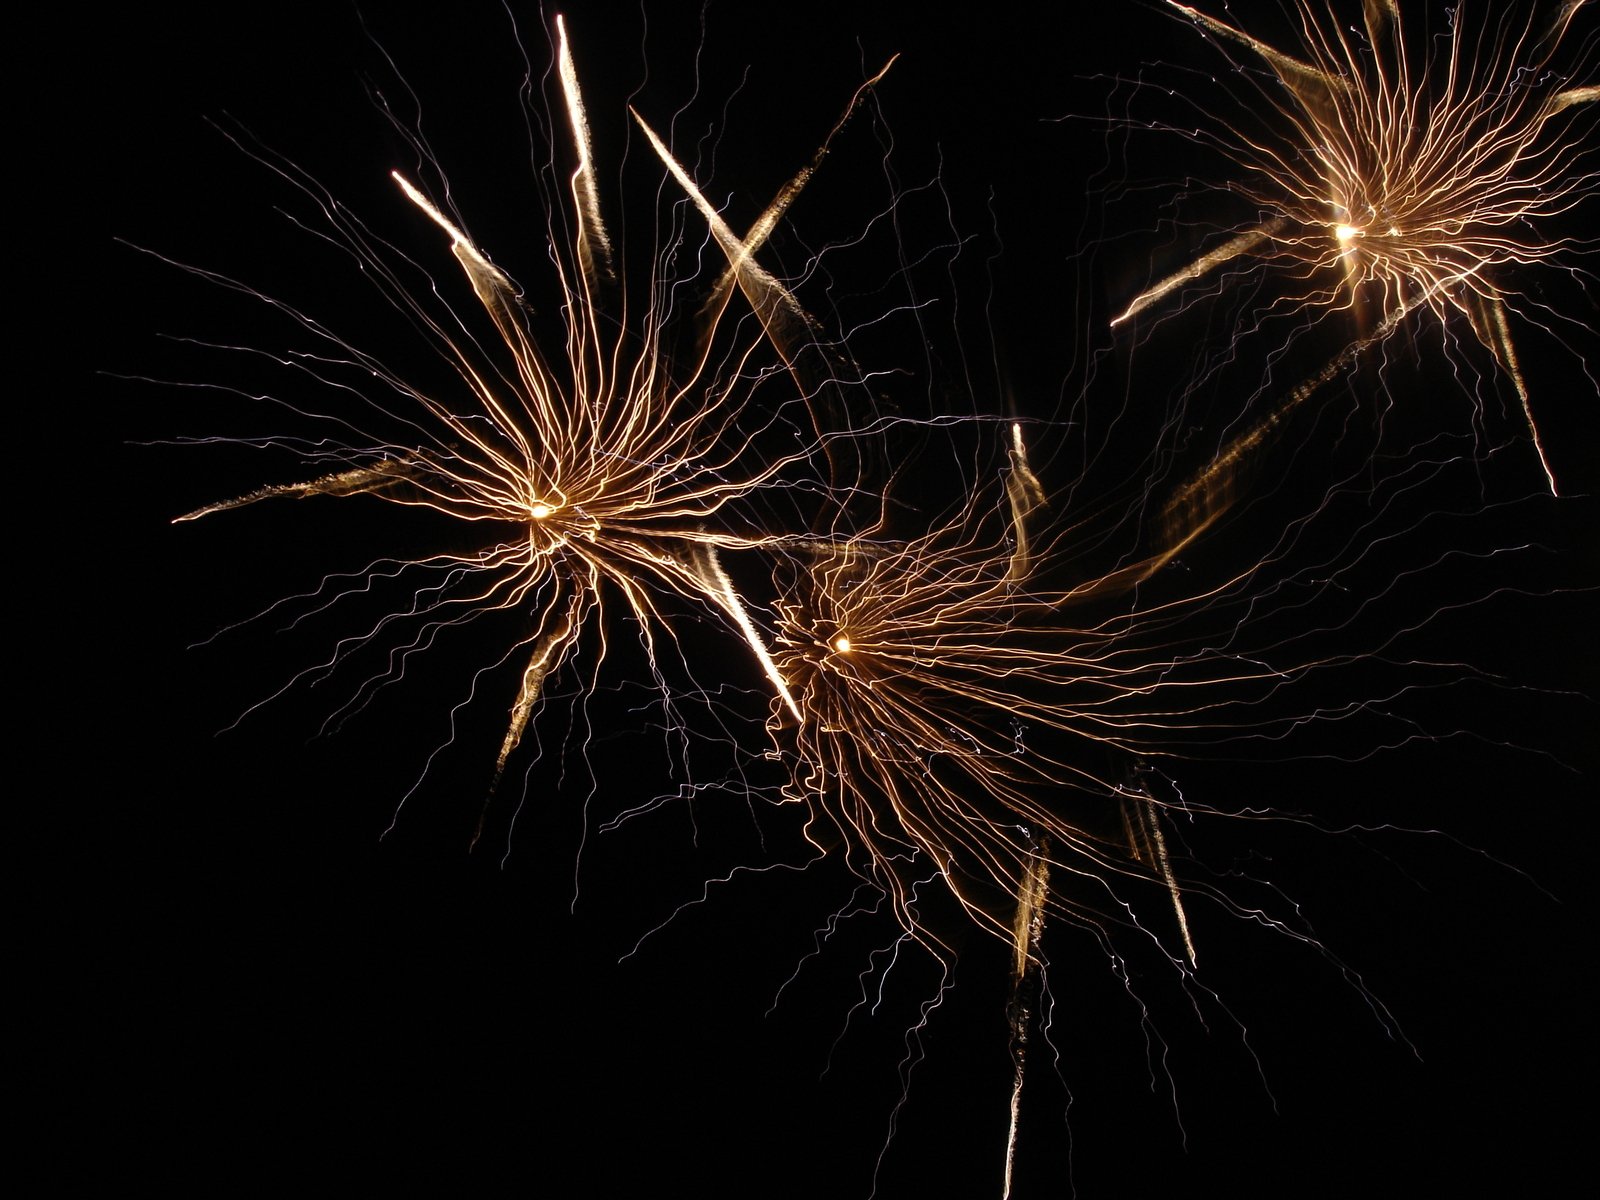 three fireworks are seen in the sky with black background